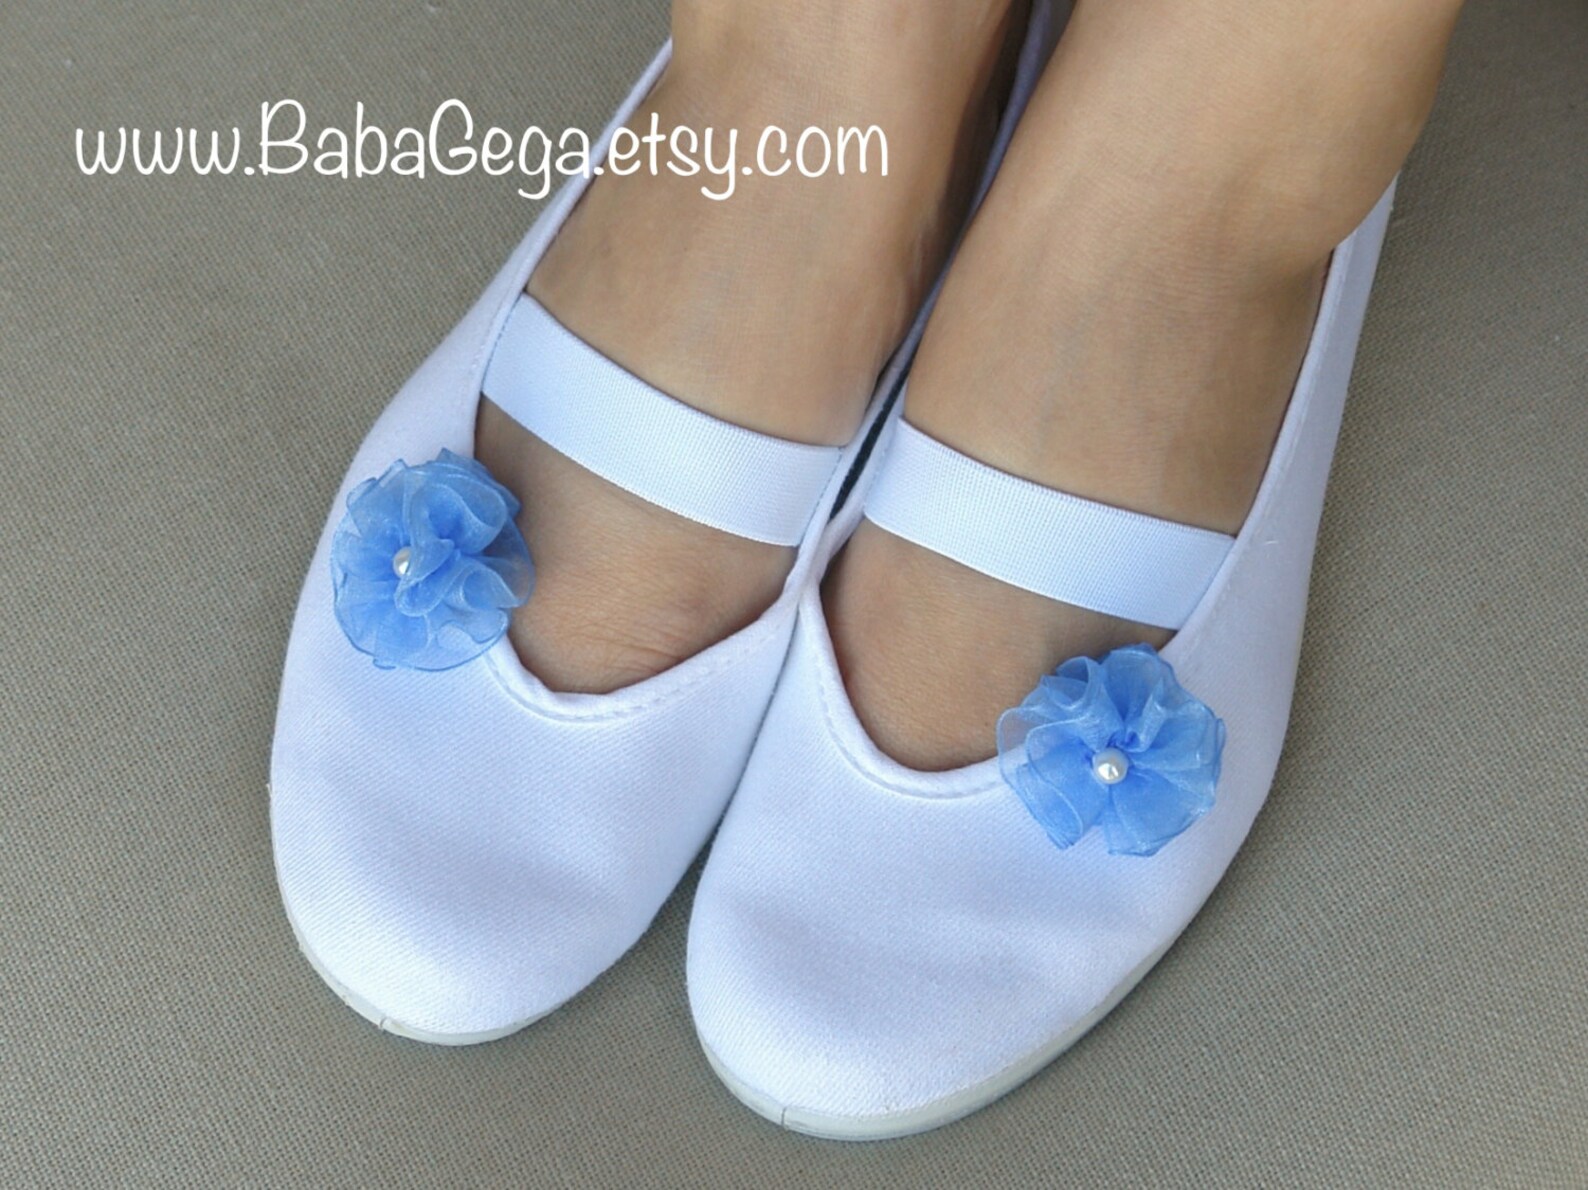 girls shoes,bridal flats,mary jane shoes,white cotton romantic shoes,flower girl shoes,wedding ballet flats,bridal shoes,summer